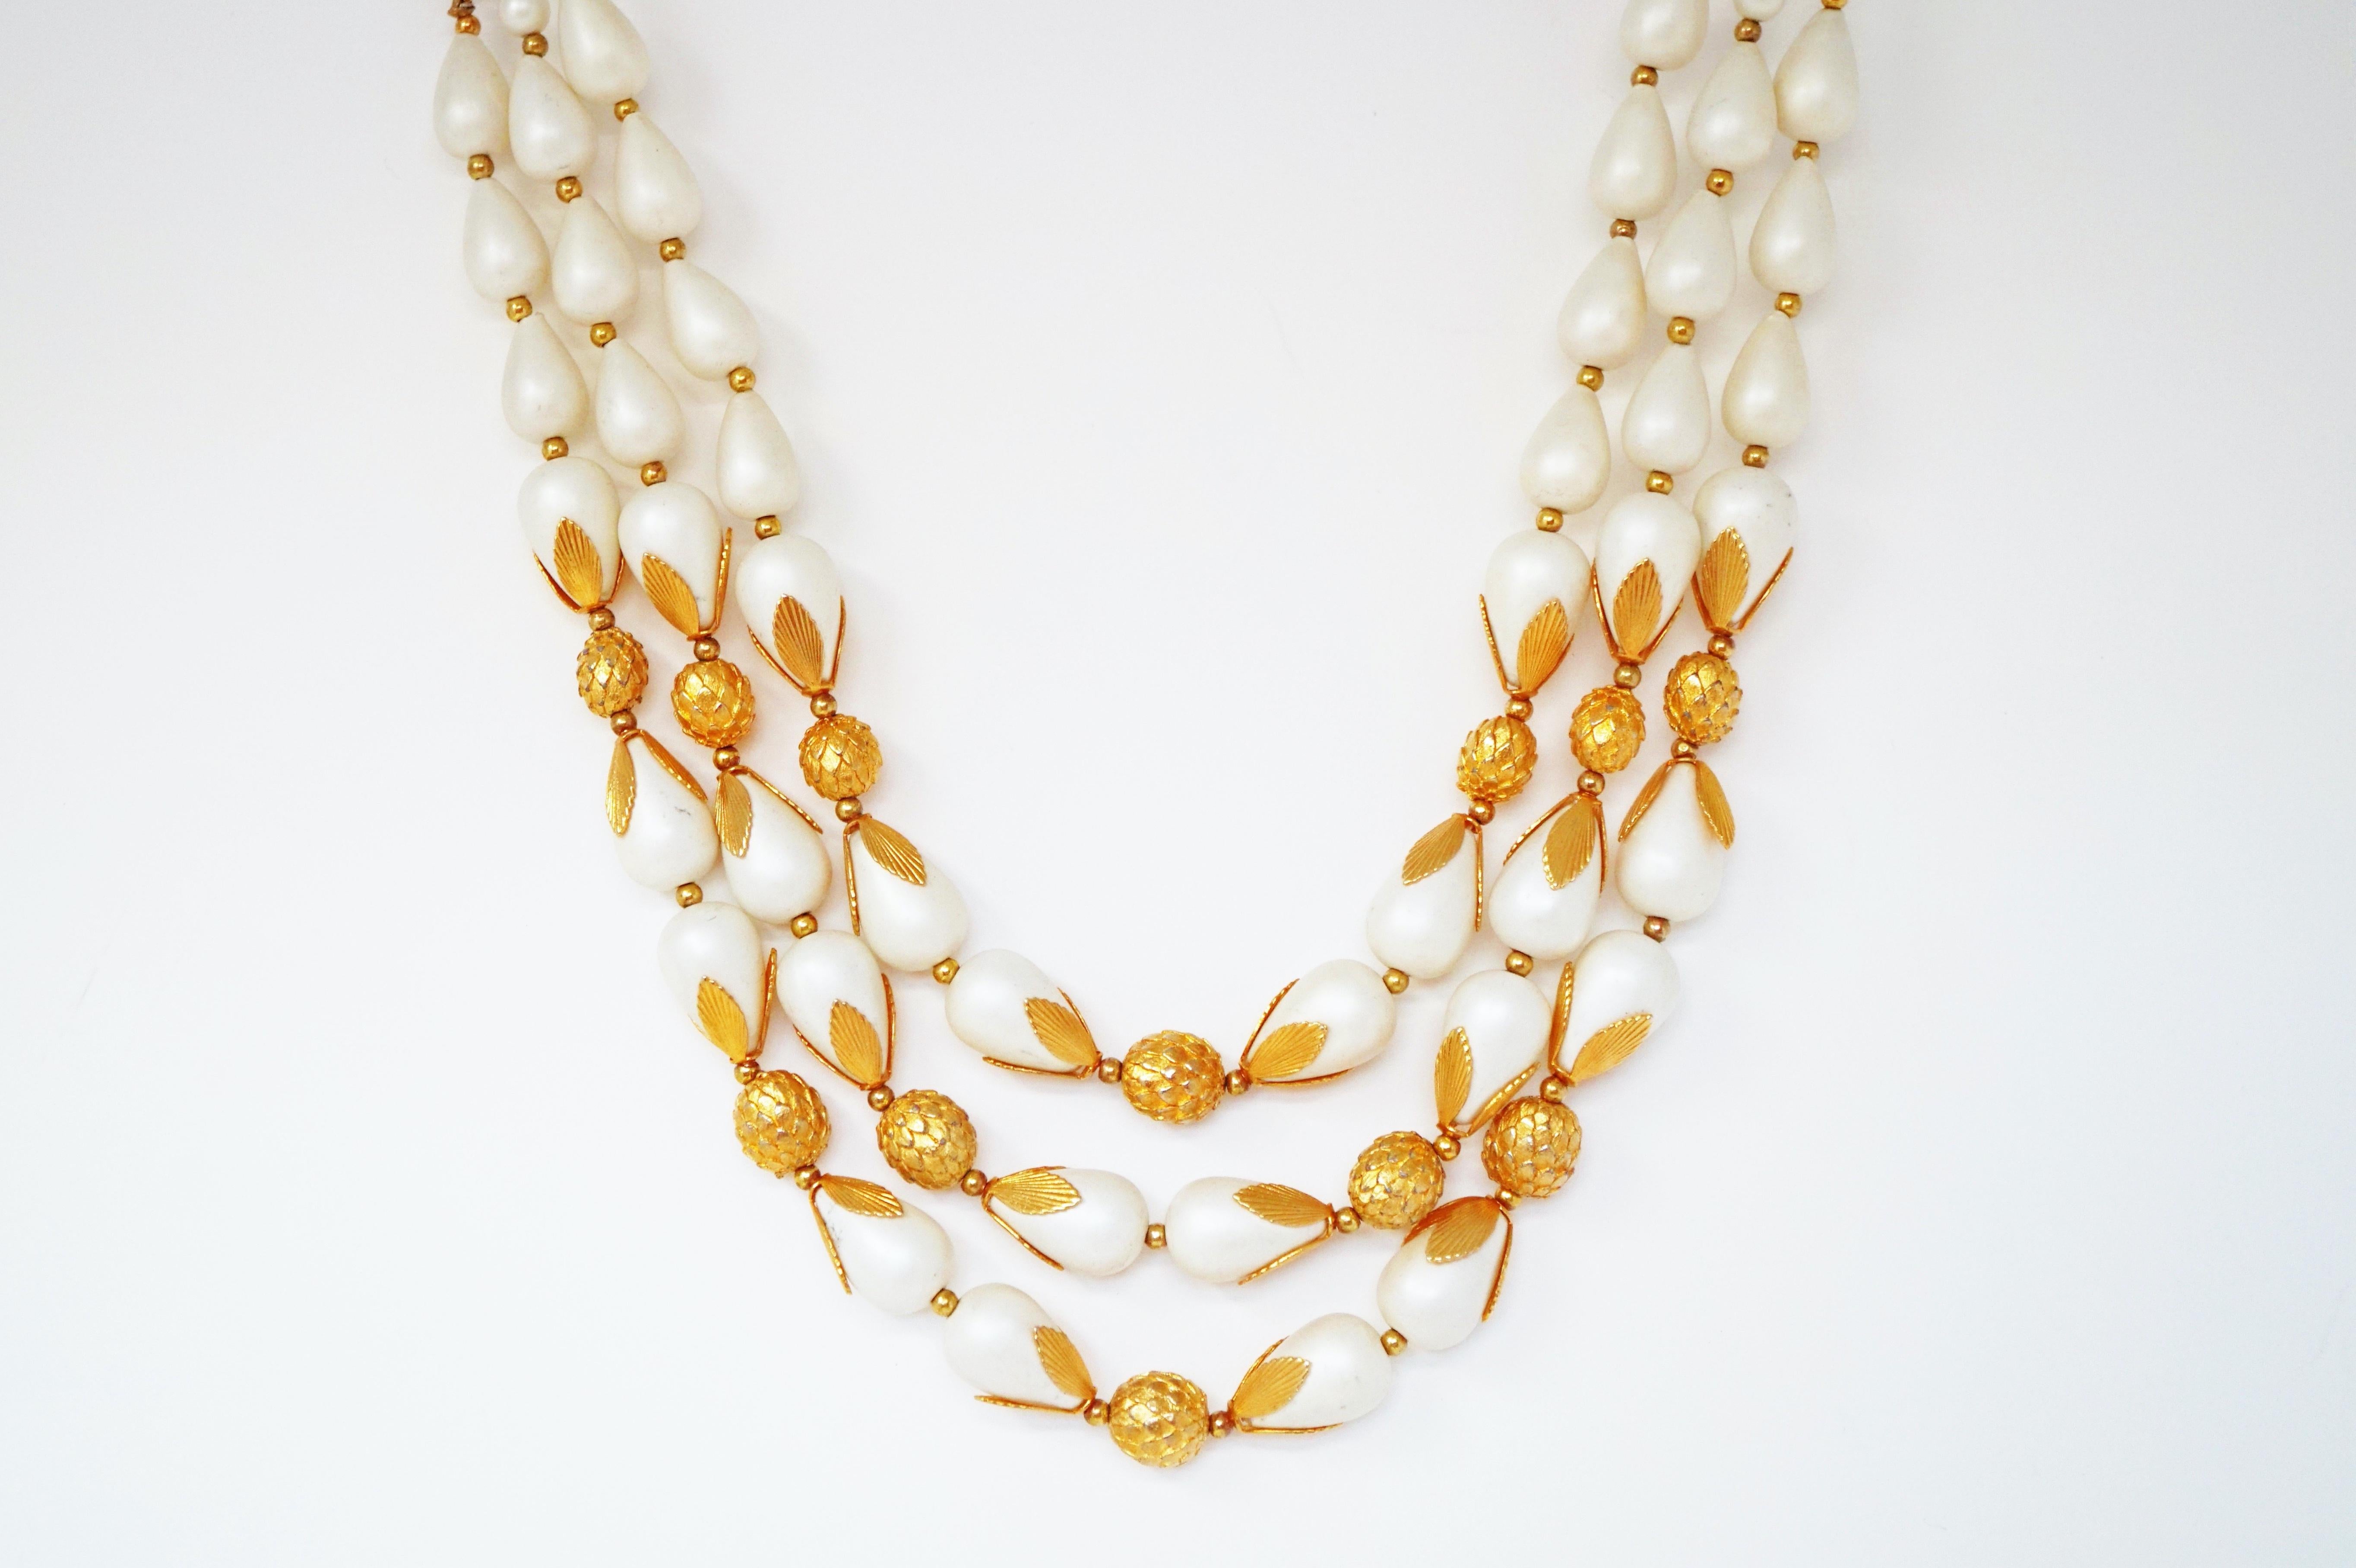 This gorgeous vintage triple strand statement necklace by Deauville, circa 1950, is an elegant piece of costume jewelry history.  Perfect for dressing up an evening look, this piece is a wonderful addition to an upscale jewelry